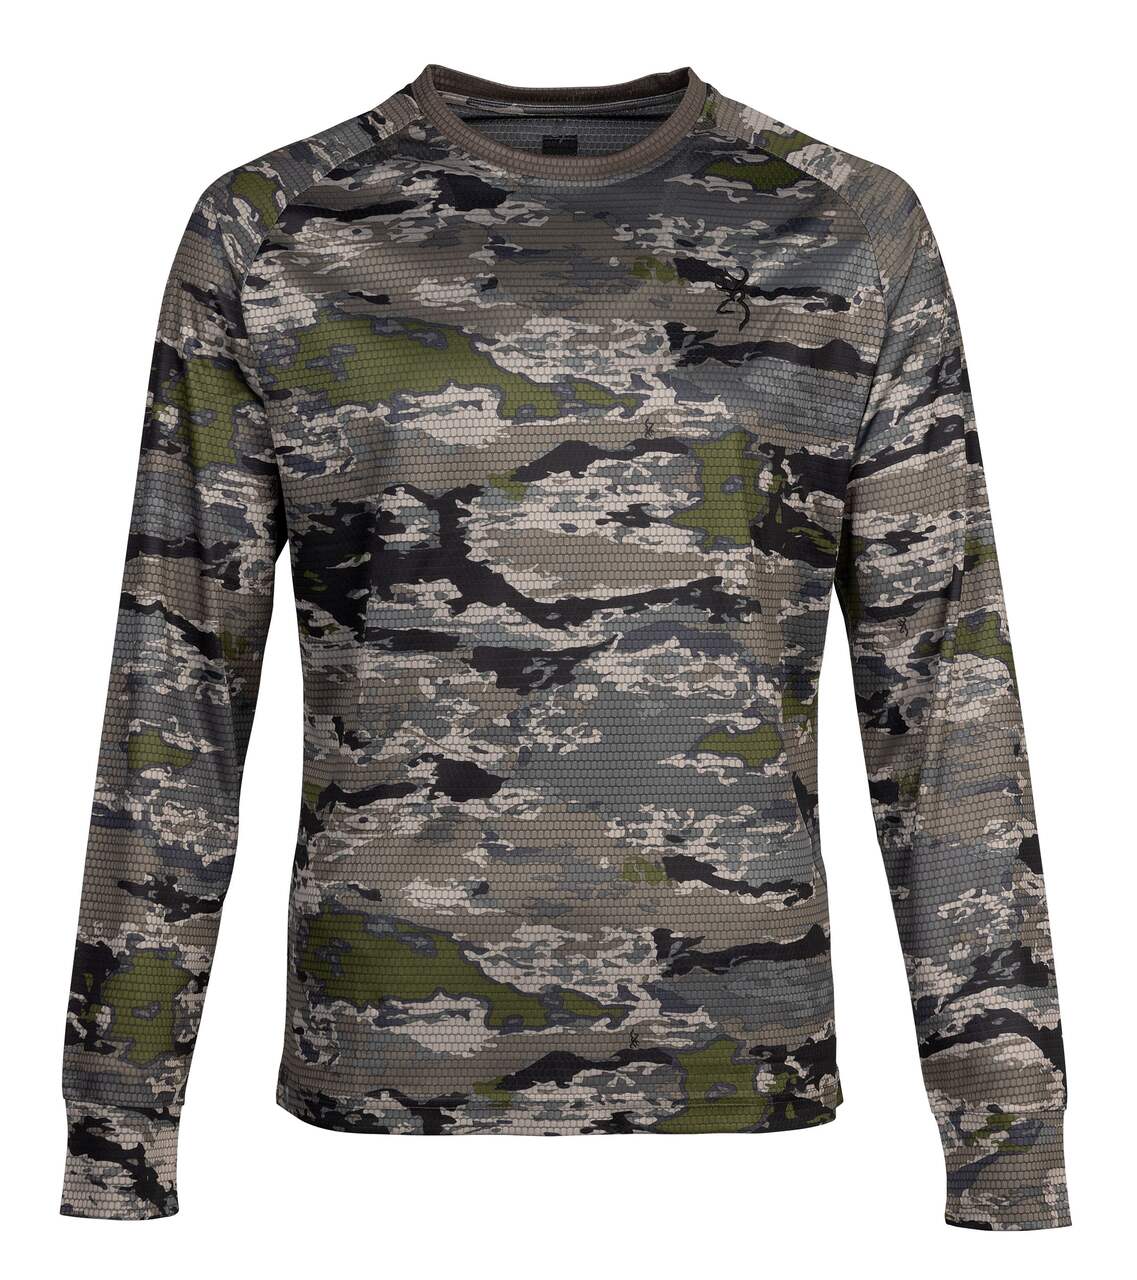 Browning SM916 Cotton Crew Neck Long Sleeve Shirt for Hunting